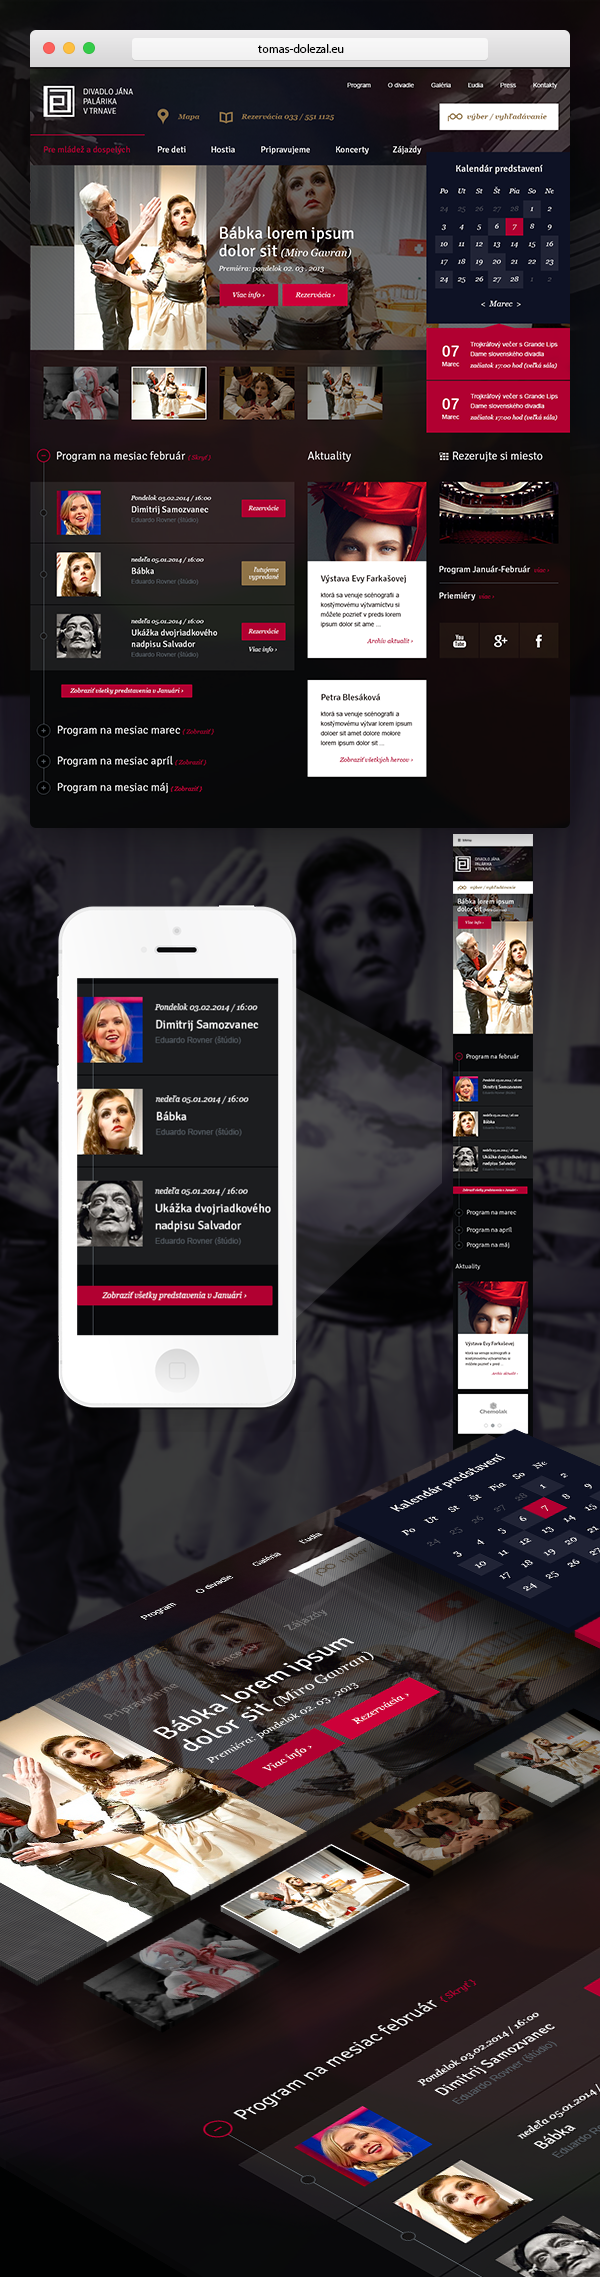 Website mobile Responsive theater  flat